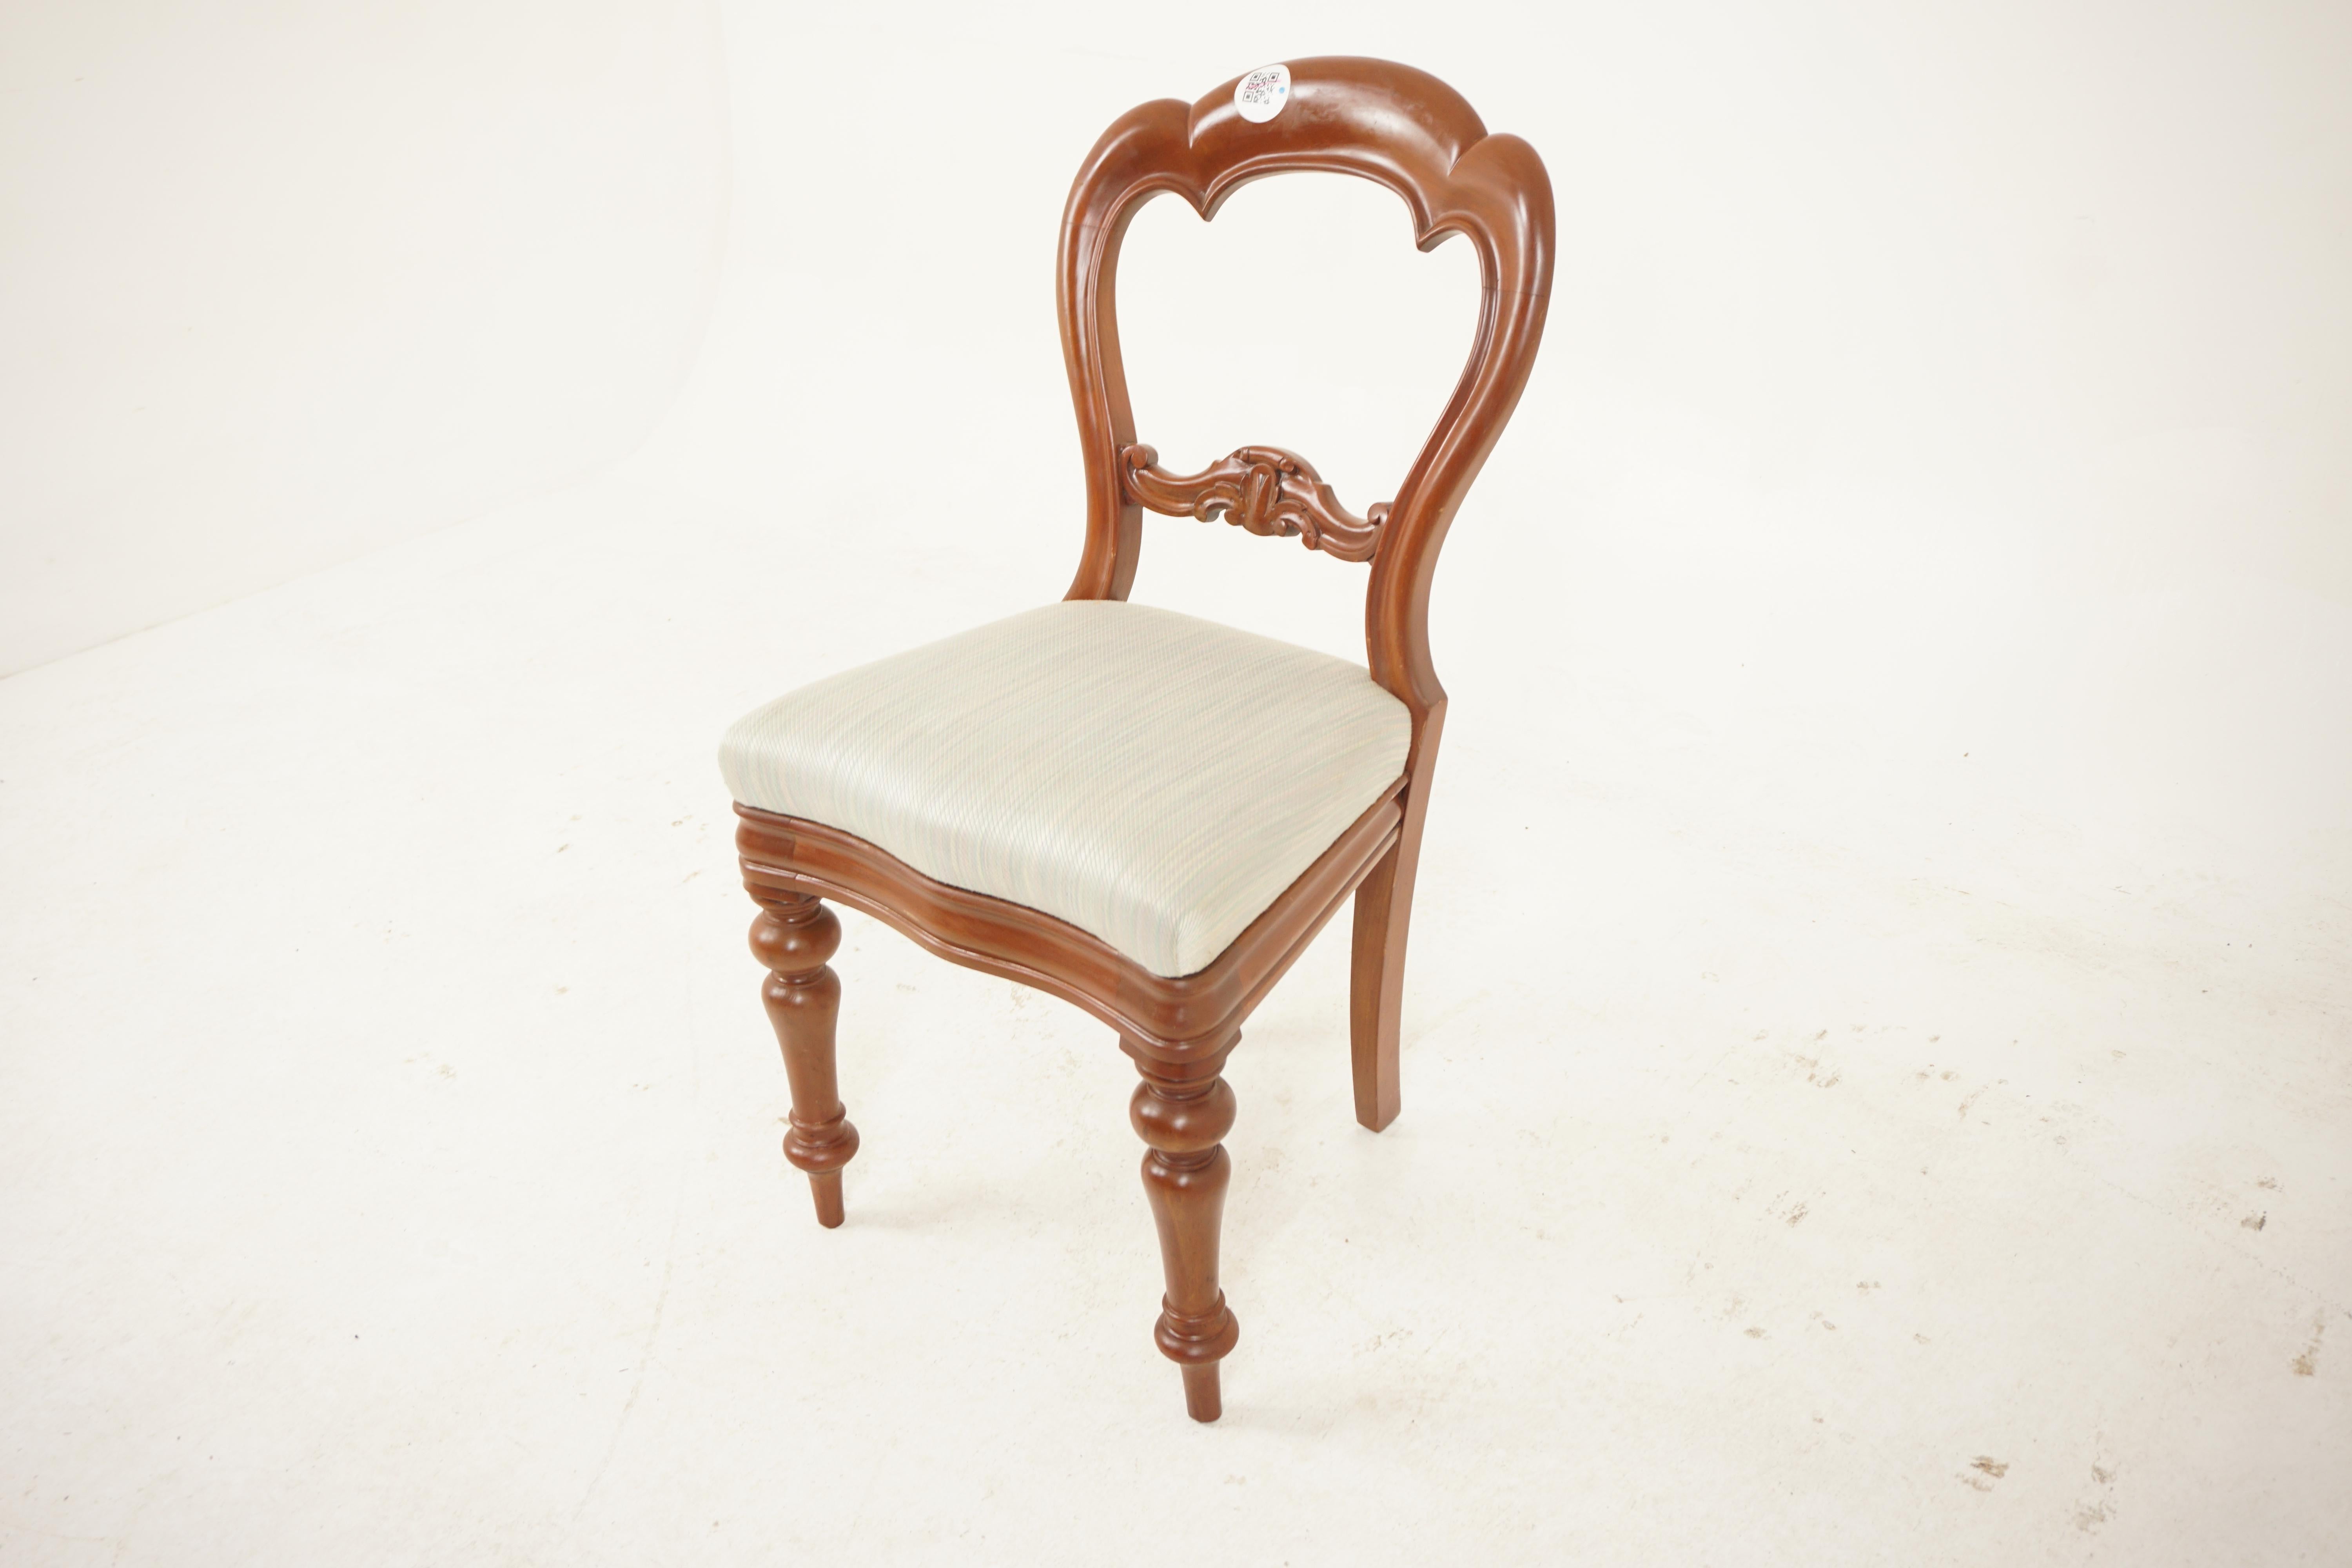 Single Victorian Walnut Balloon Back Chair, Scotland 1880, H043

Scotland 1880
Solid Walnut
Original Finish
With shaped back rail above a carved center rail
Upholstered lift up seat
On turned front legs and out swept back legs
Good condition and all